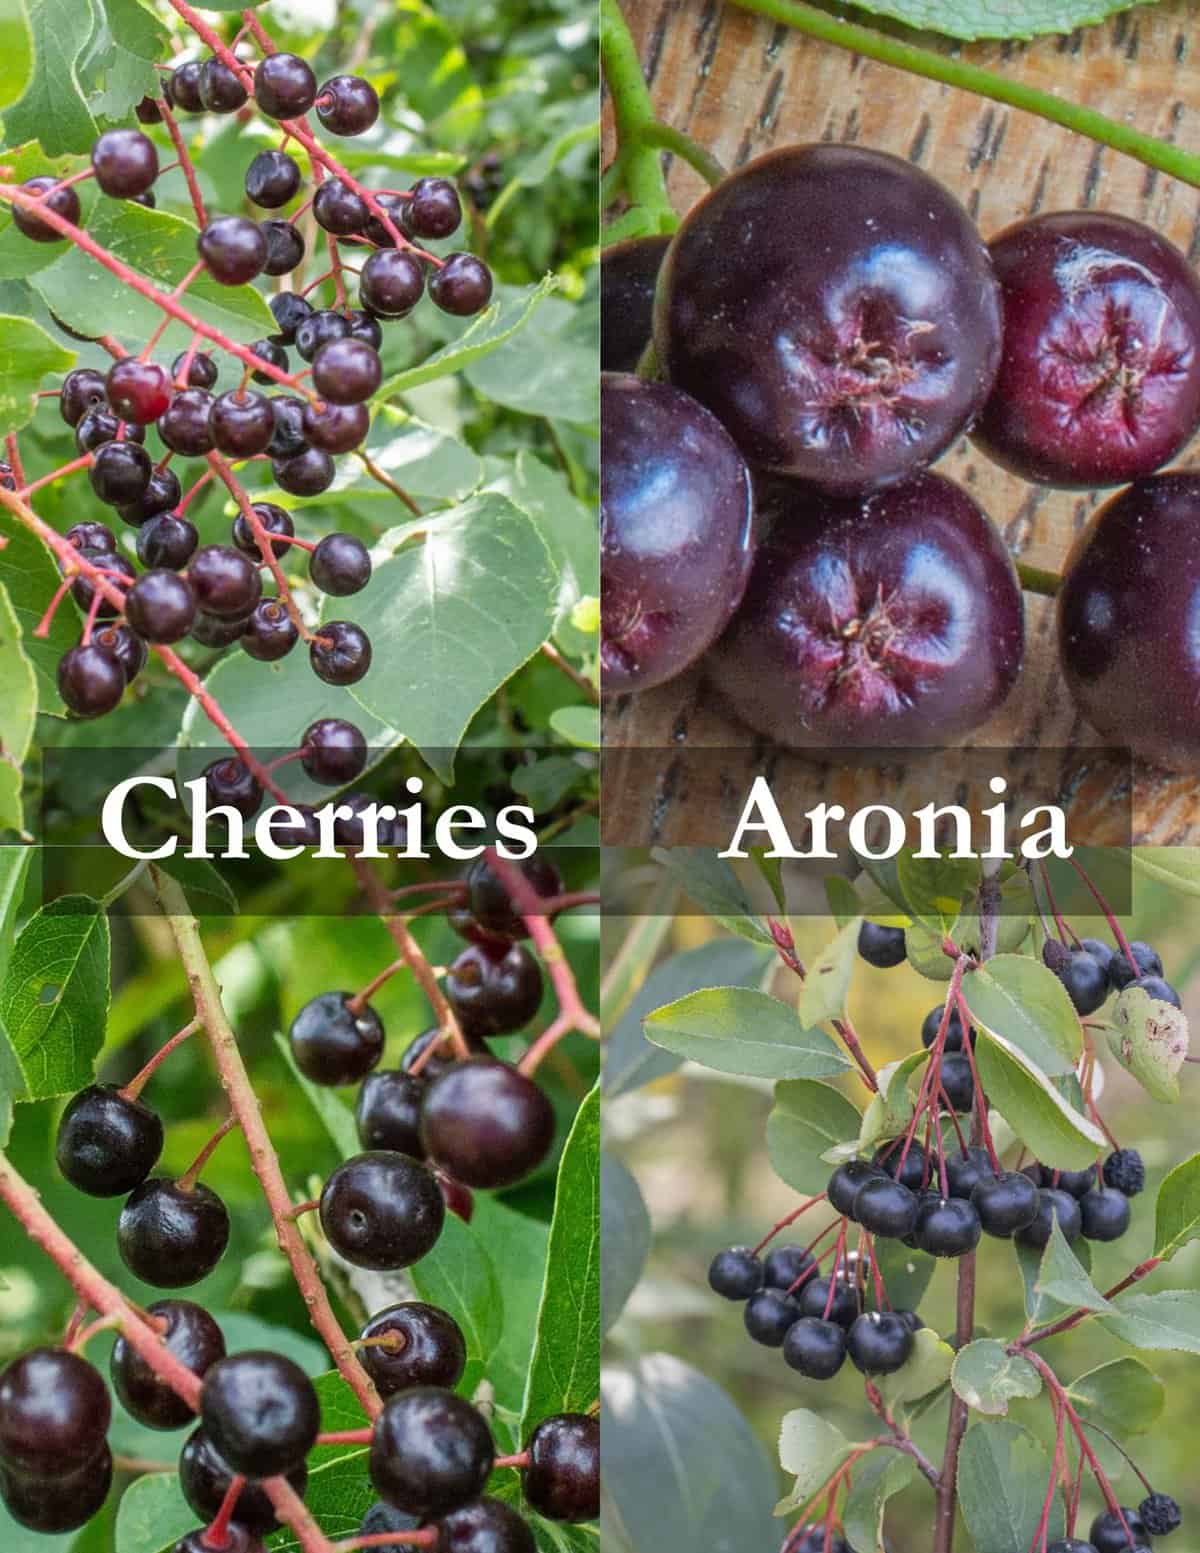 An infographic comparing the differences of chokecherries (Prunus virginiana) and chokeberries (aronia). 